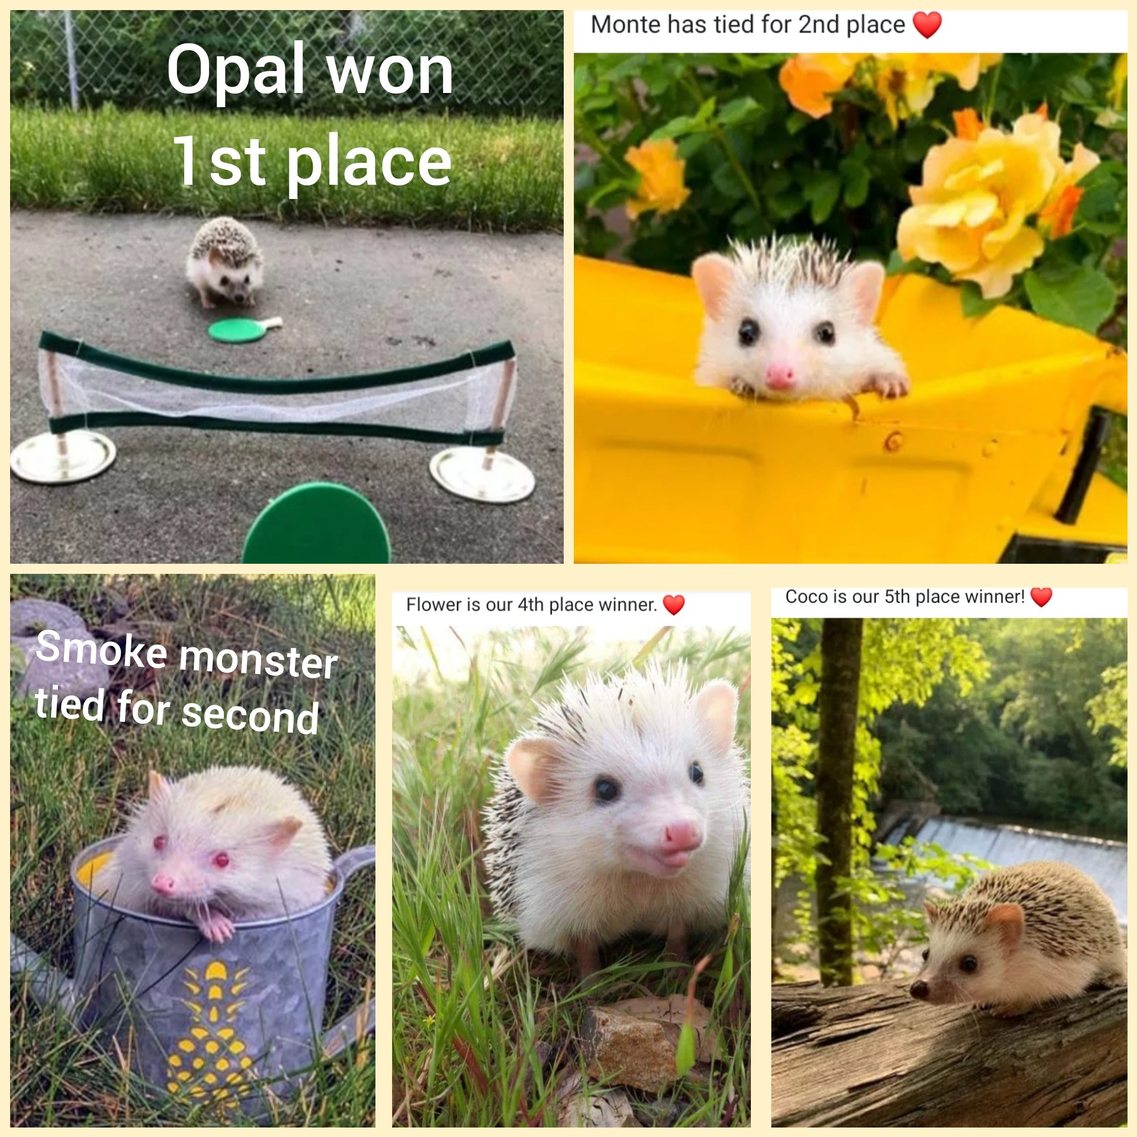 As requested, here are the hedgehog contest results! - meme